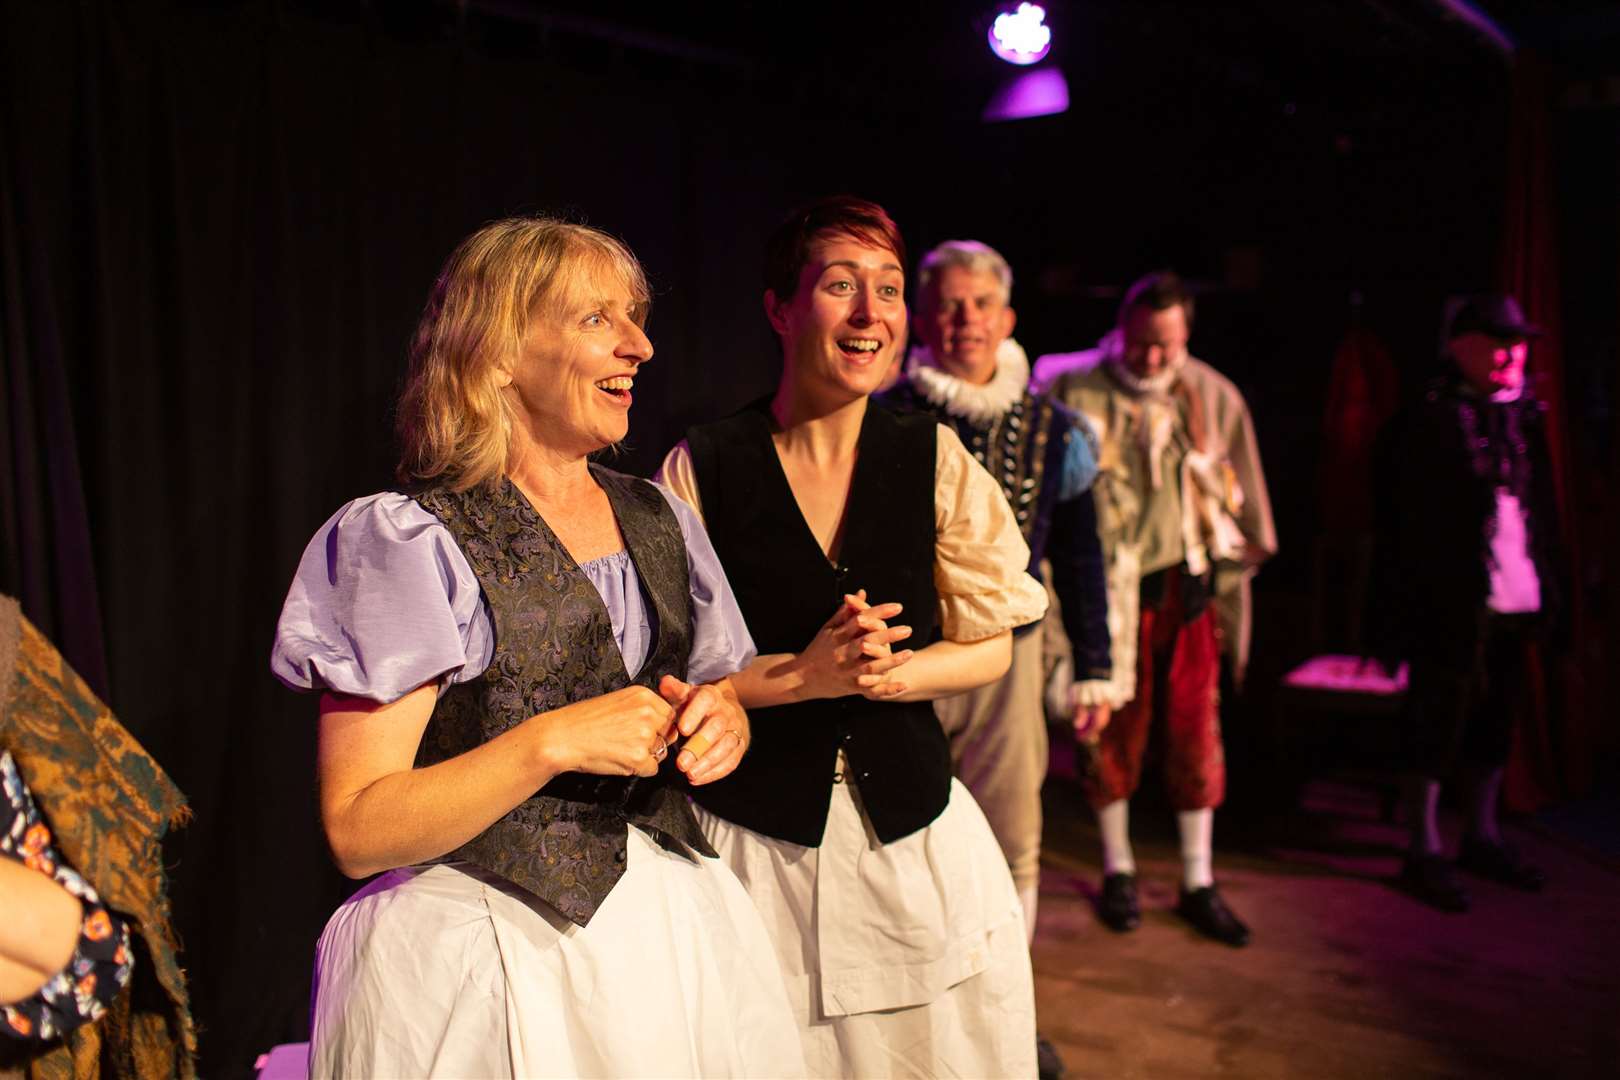 Fiona Chapman (left) and Rosalyn Paton in Mary Queen Of Scots Got Her Head Chopped Off, presented by Inverness drama company The Florians from Wednesday (Sept 15) at their Florians Theatre, Bught Park, Inverness. Picture: Matthias Kremer